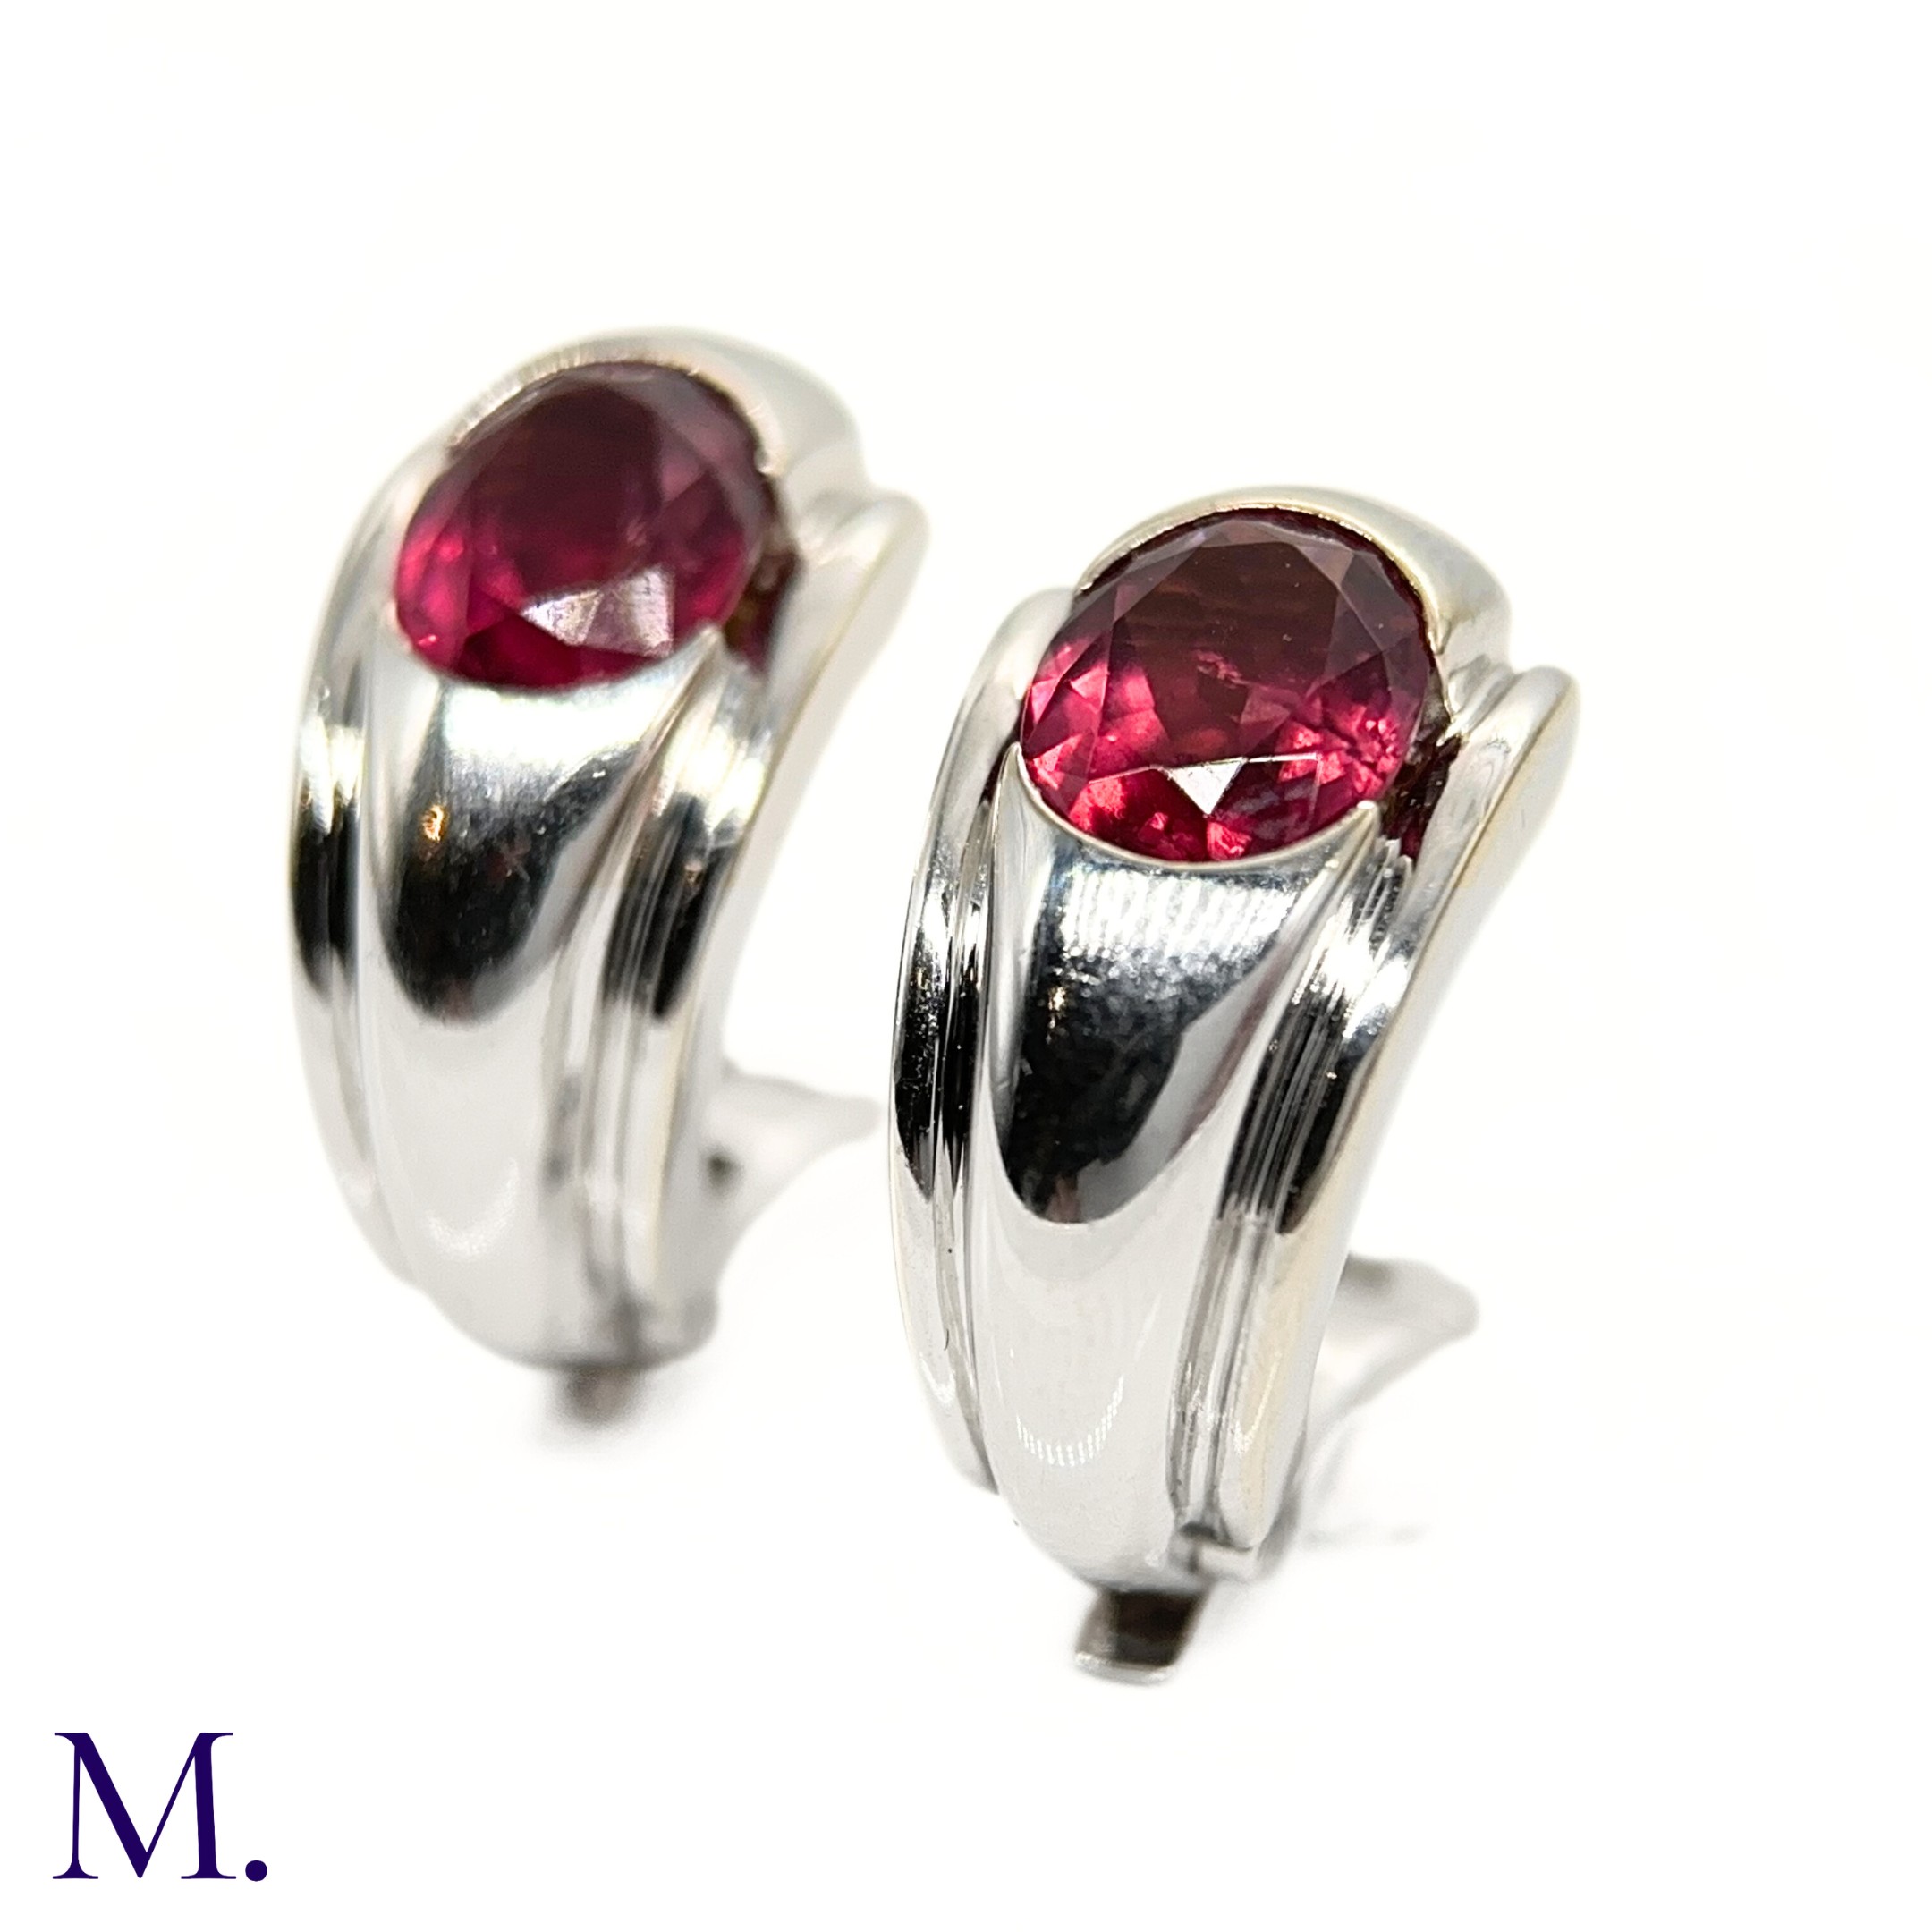 A Pair of Pink Tourmaline Earclips by Boucheron - Image 4 of 4